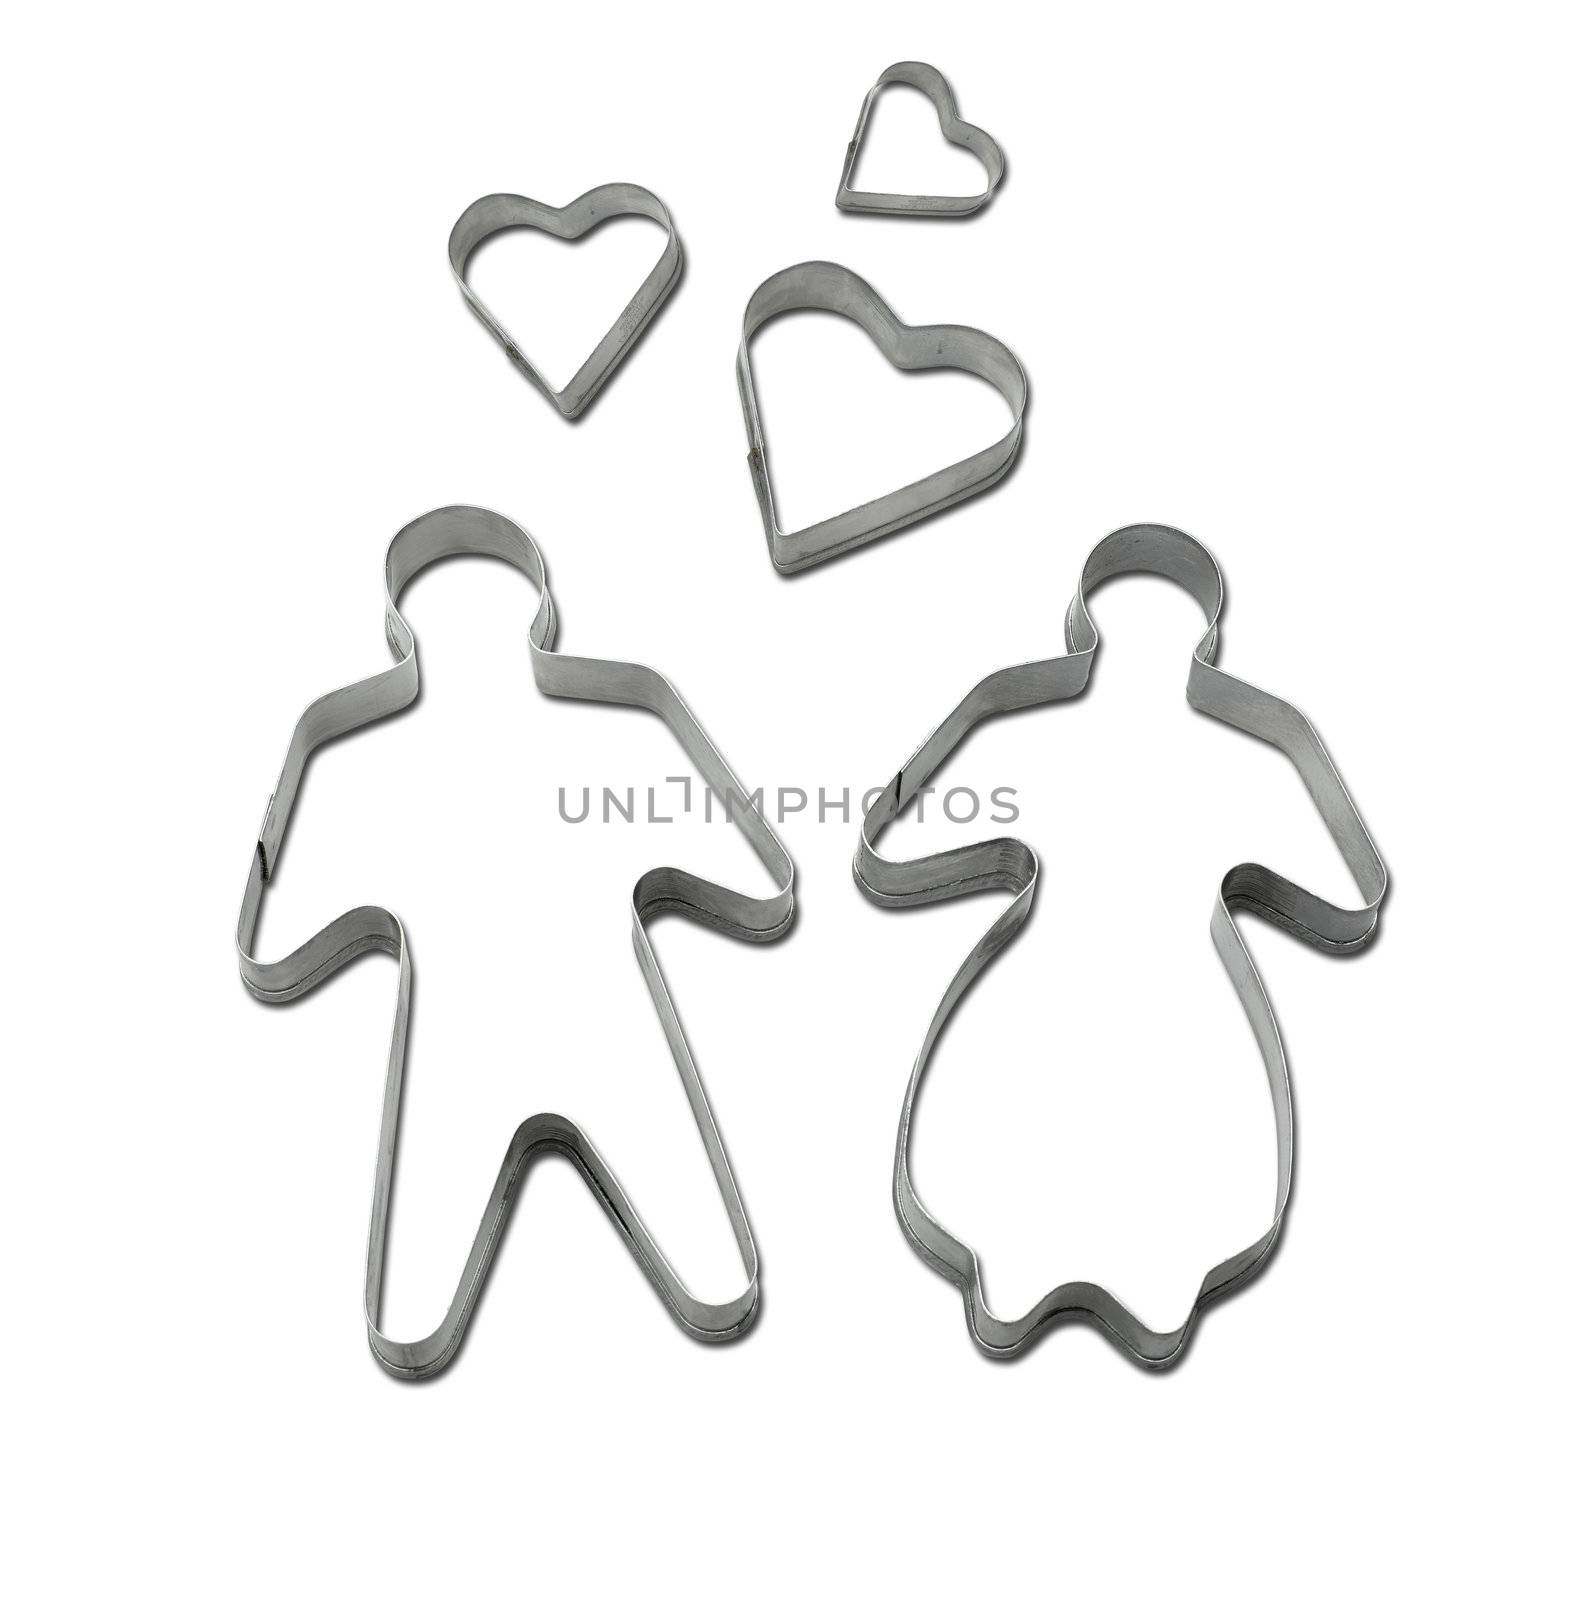 Cookie cutter on white background with clipping path